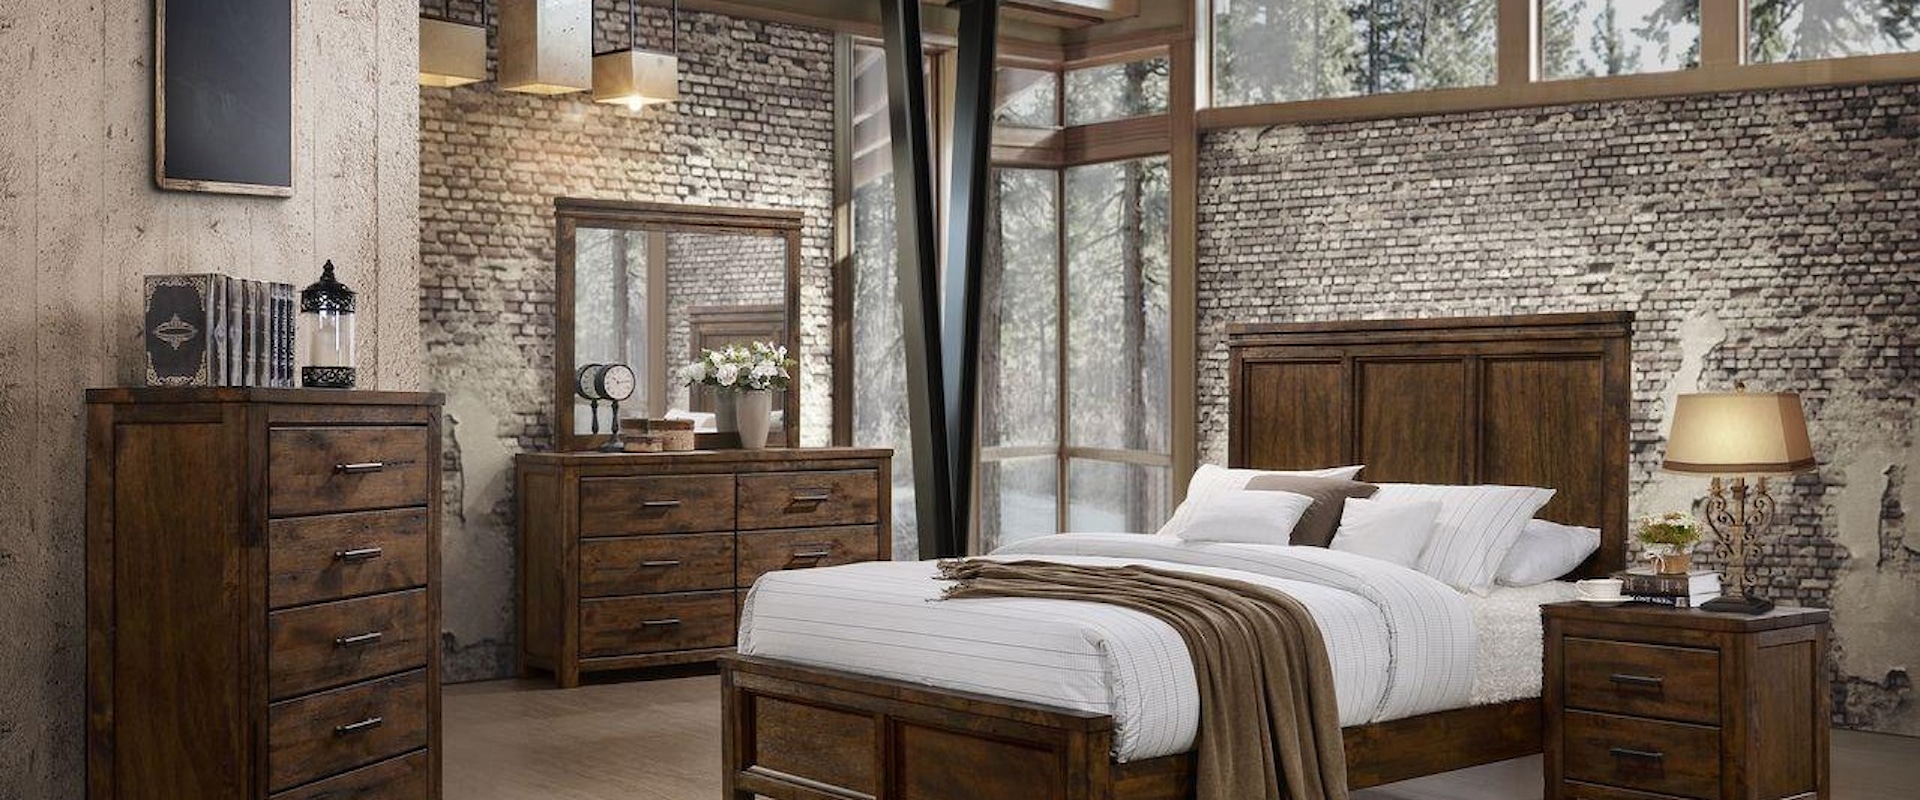 6 Piece Solid Wood King Bedroom Group